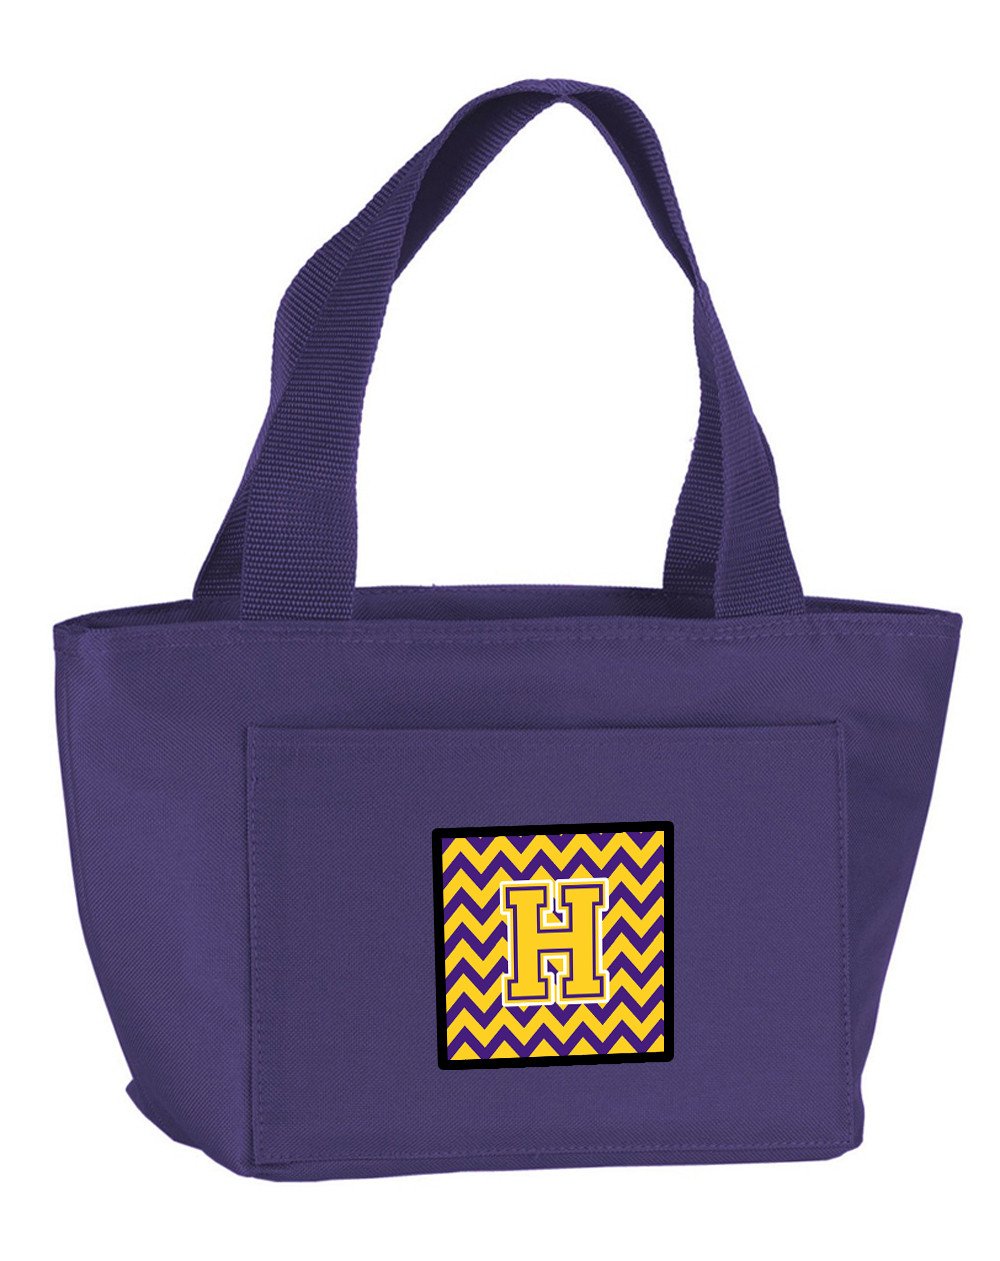 Letter H Chevron Purple and Gold Lunch Bag CJ1041-HPR-8808 by Caroline's Treasures